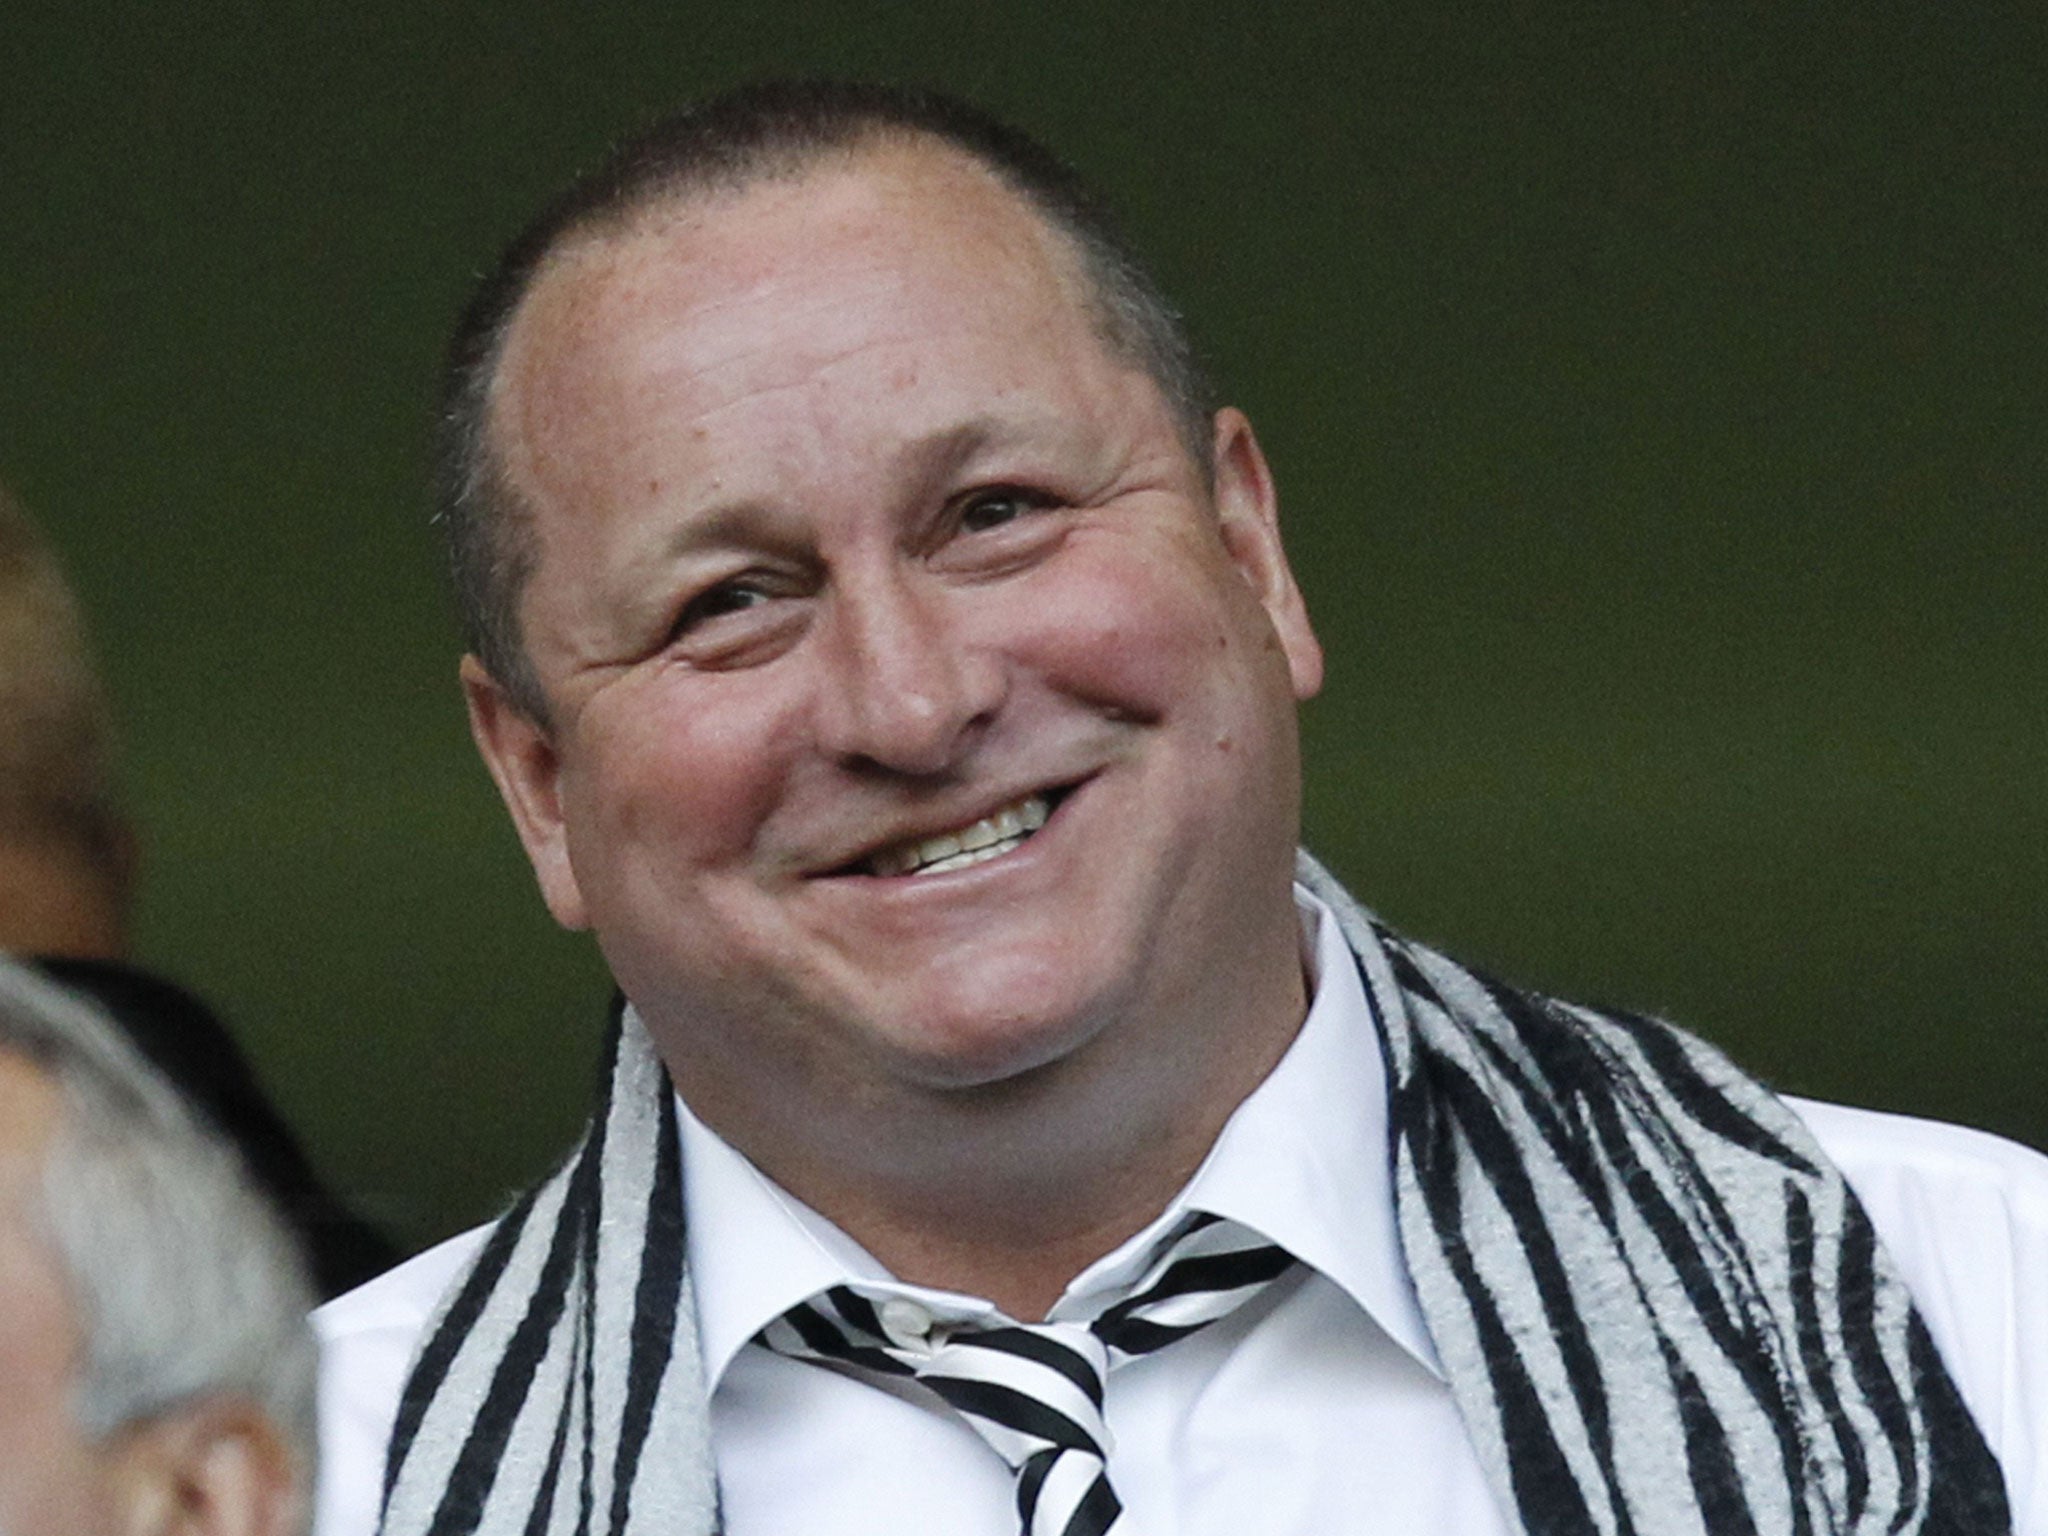 Mike Ashley said that as a FTSE 100 group, Sports Direct had ‘to set a high moral standard’